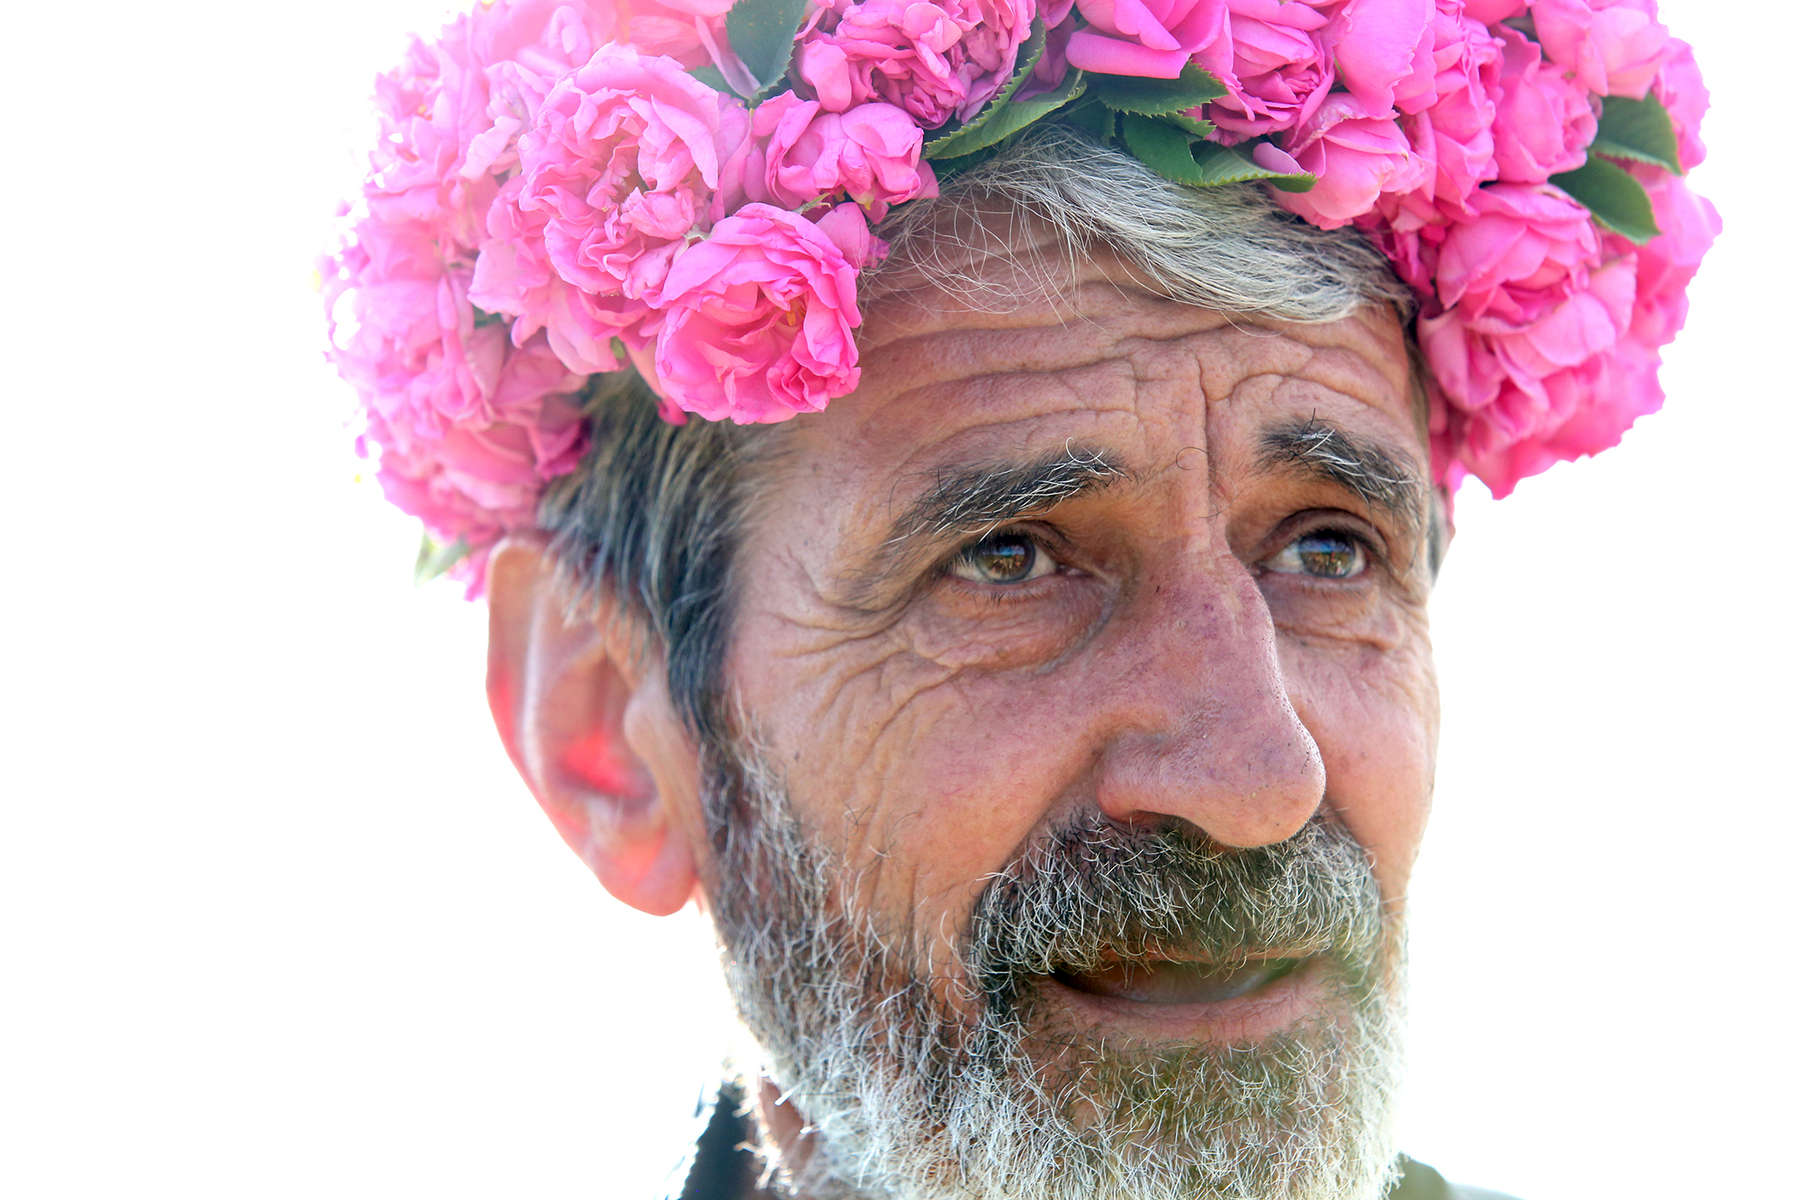 Yonko Yonkov, 65, wears a rose garland he makes for guests to the garden while picking roses in his rose gardens in Osetenovo, Bulgaria on May 29, 2018. He says rose-picking usually starts at sunrise and wraps up before noon. The rose flower is very sensitive, and its oil resides in the top layers of the flower, so it evaporates easily with rising temperatures. Cold dew drops in the morning hinder the evaporation of oil, and the moist air preserves the plant’s moisture, turgor and oil content, which is why farmers usually pick the flowers so early.Photo by: Yana Paskova for National Geographic Traveler